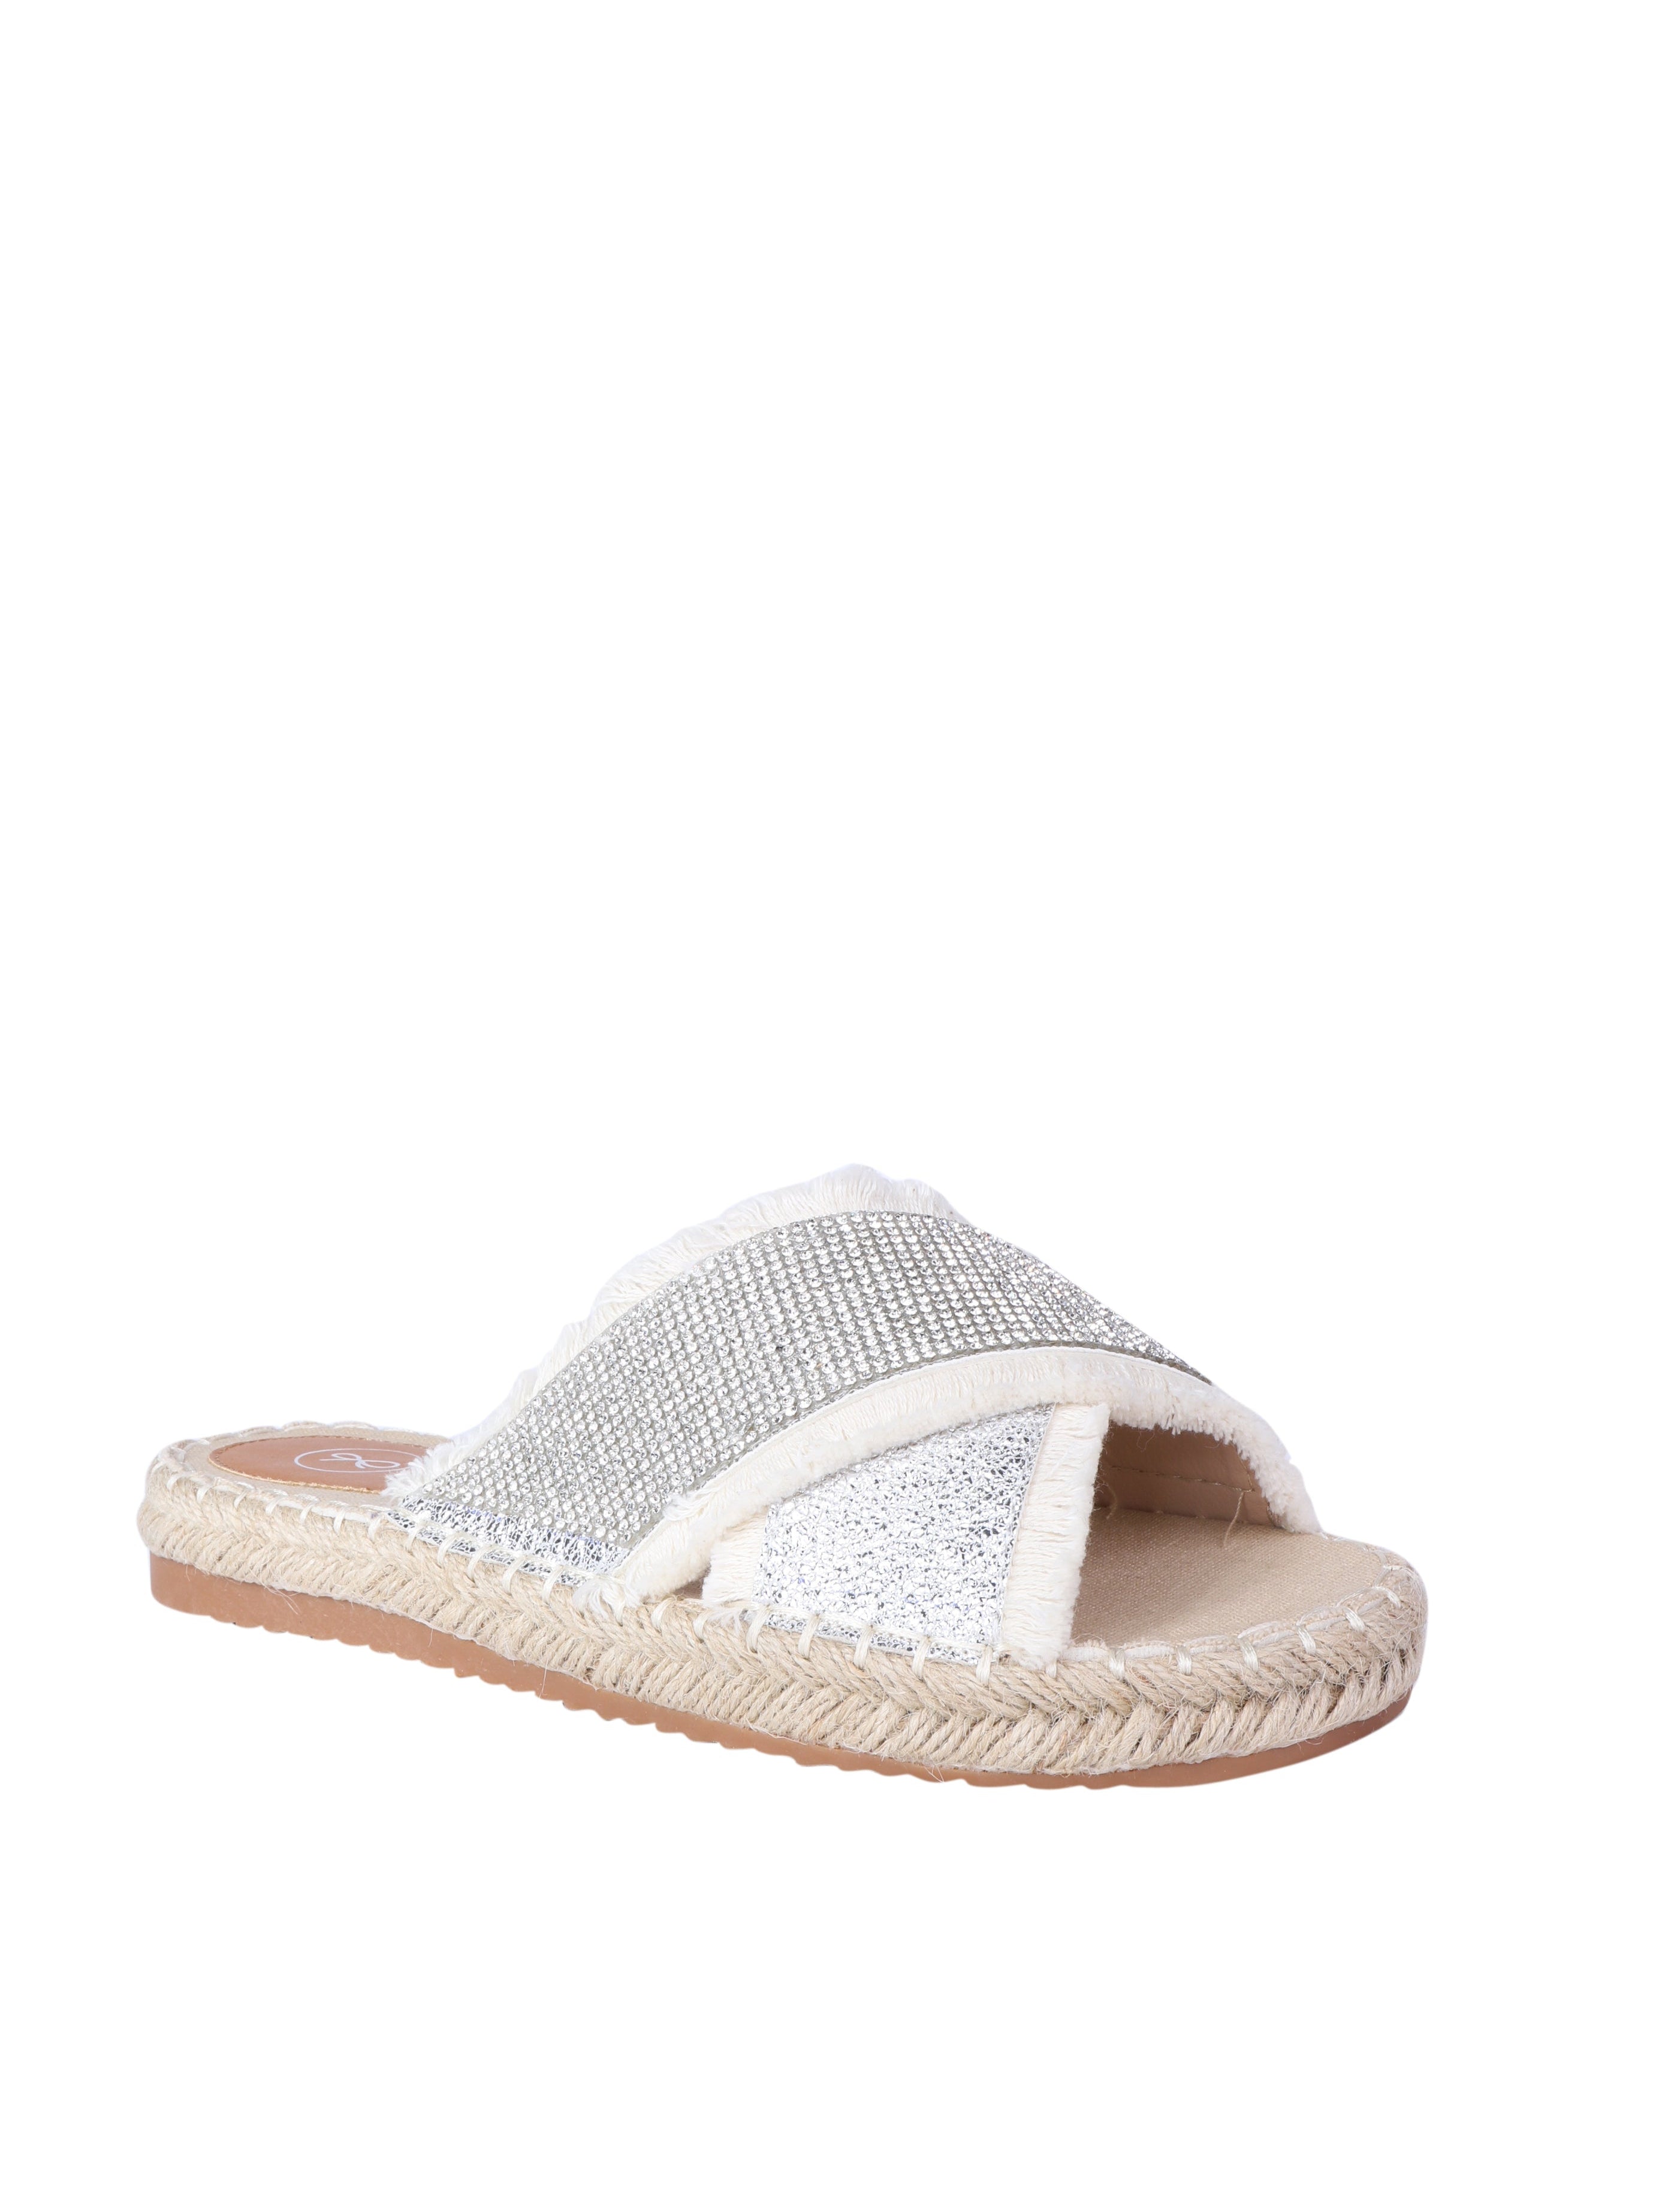 Criss cross espadrilles sandals with bling